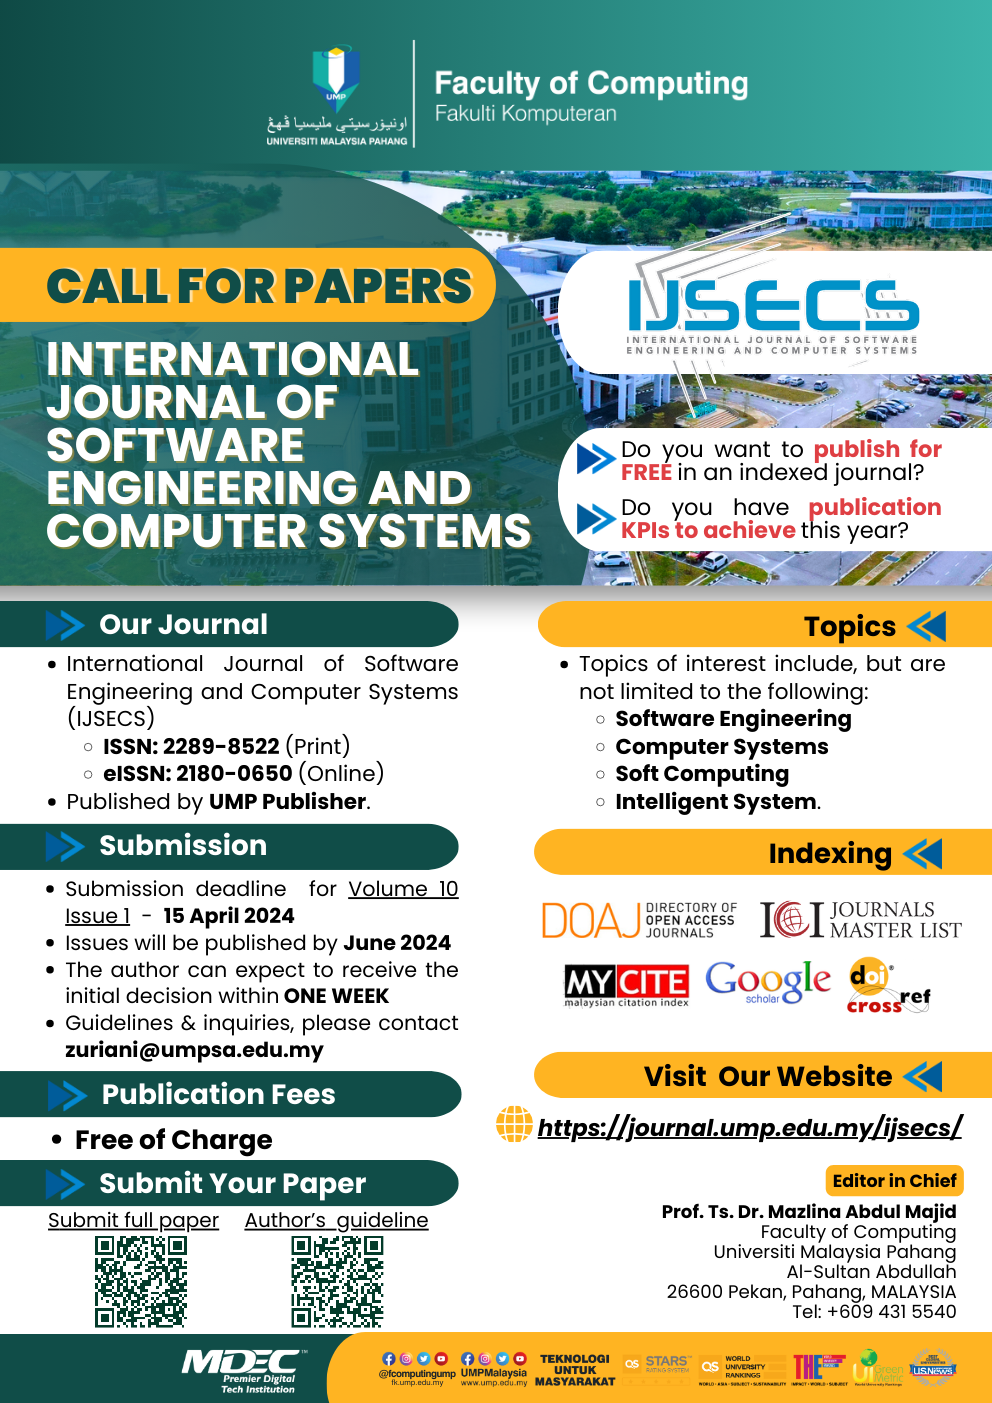 Call for Papers - International Journal of Software Engineering and Computer Systems